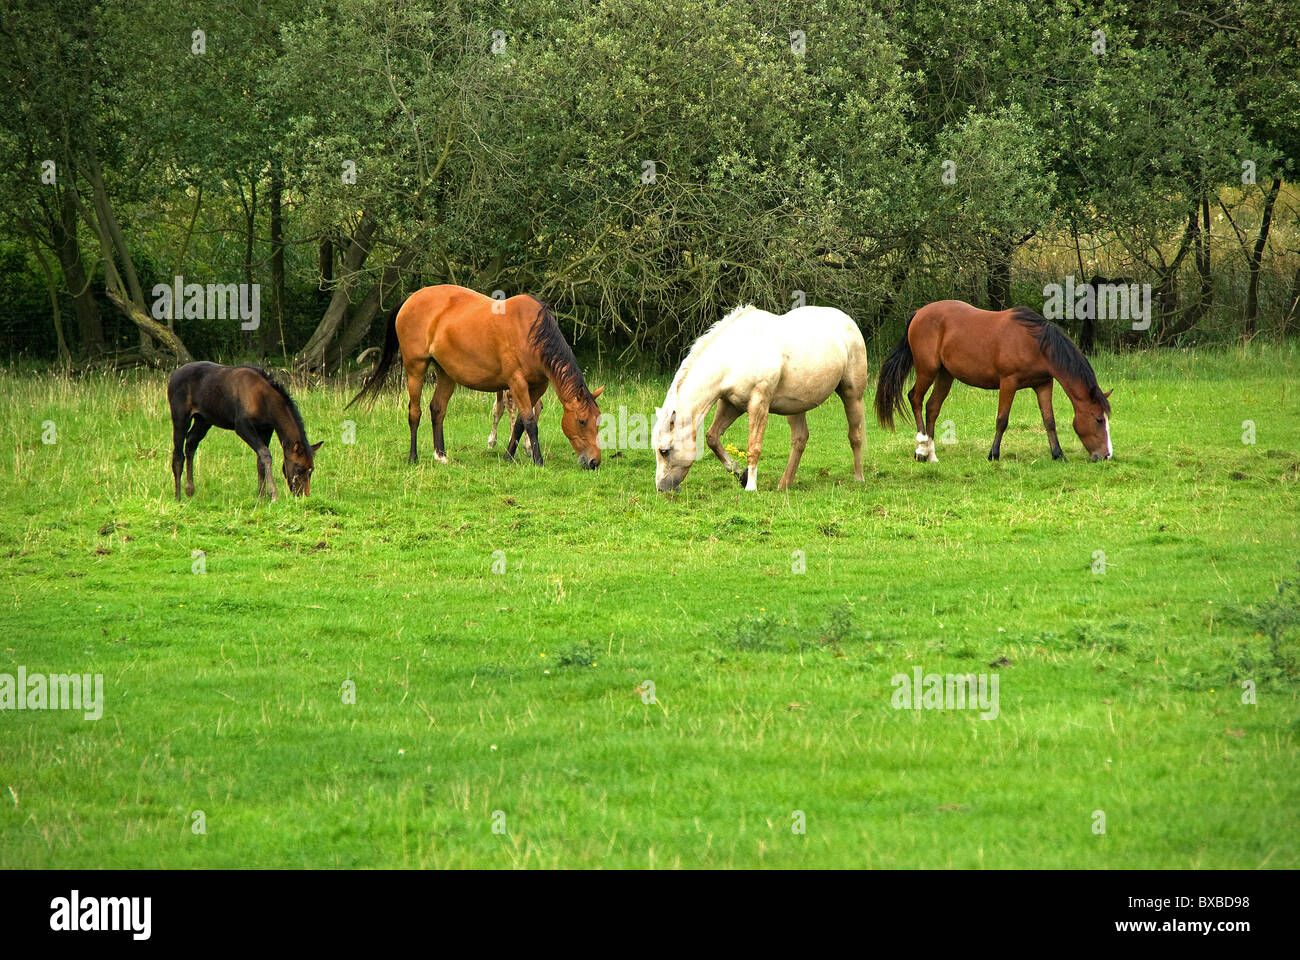 Young foal grazing with the adults Stock Photo